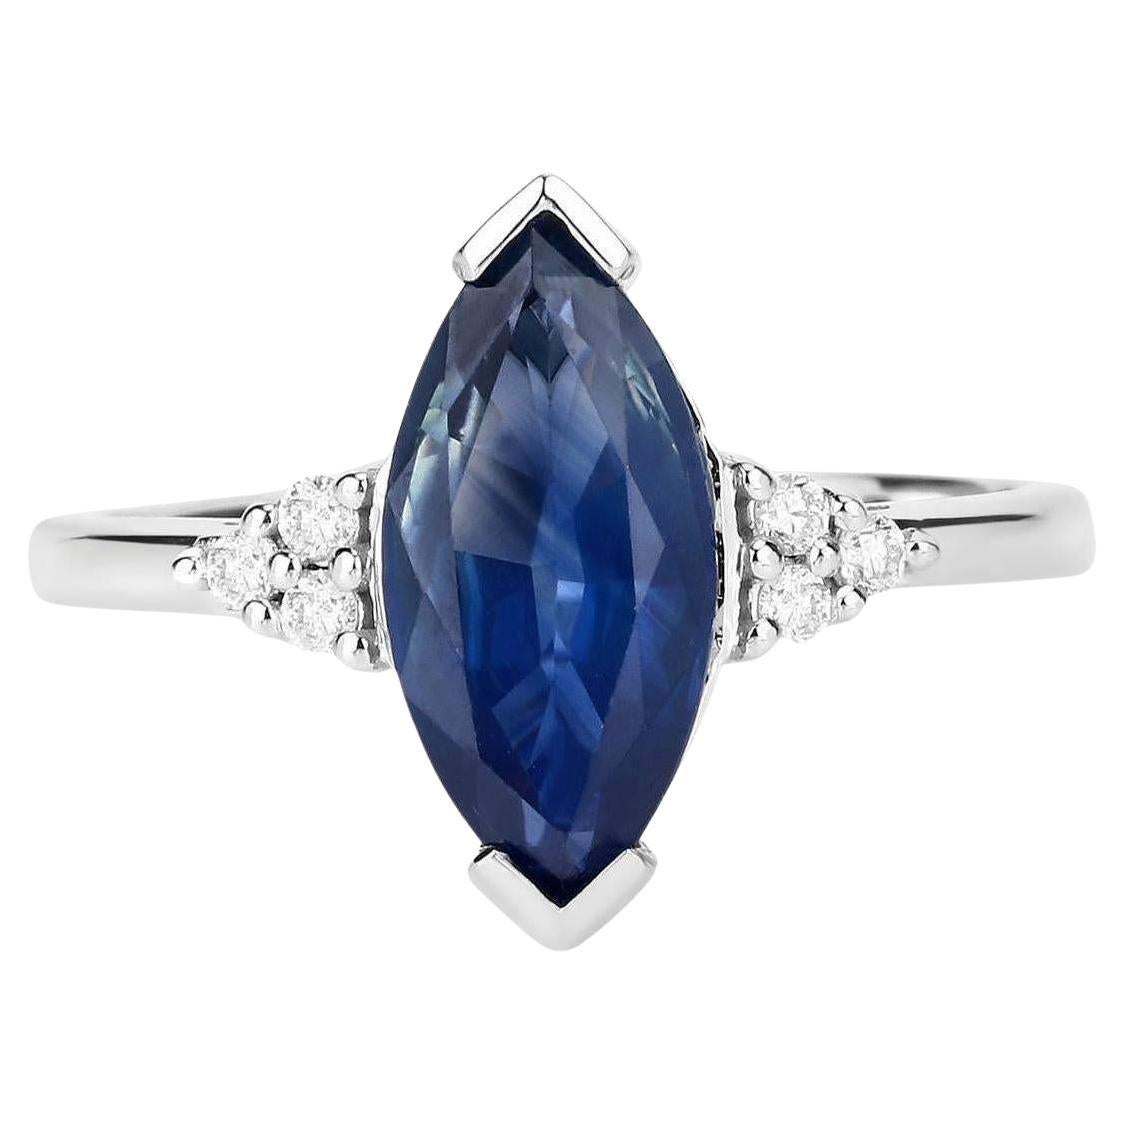 Blue Sapphire Ring With Diamonds 4.83 Carats 14K White Gold For Sale